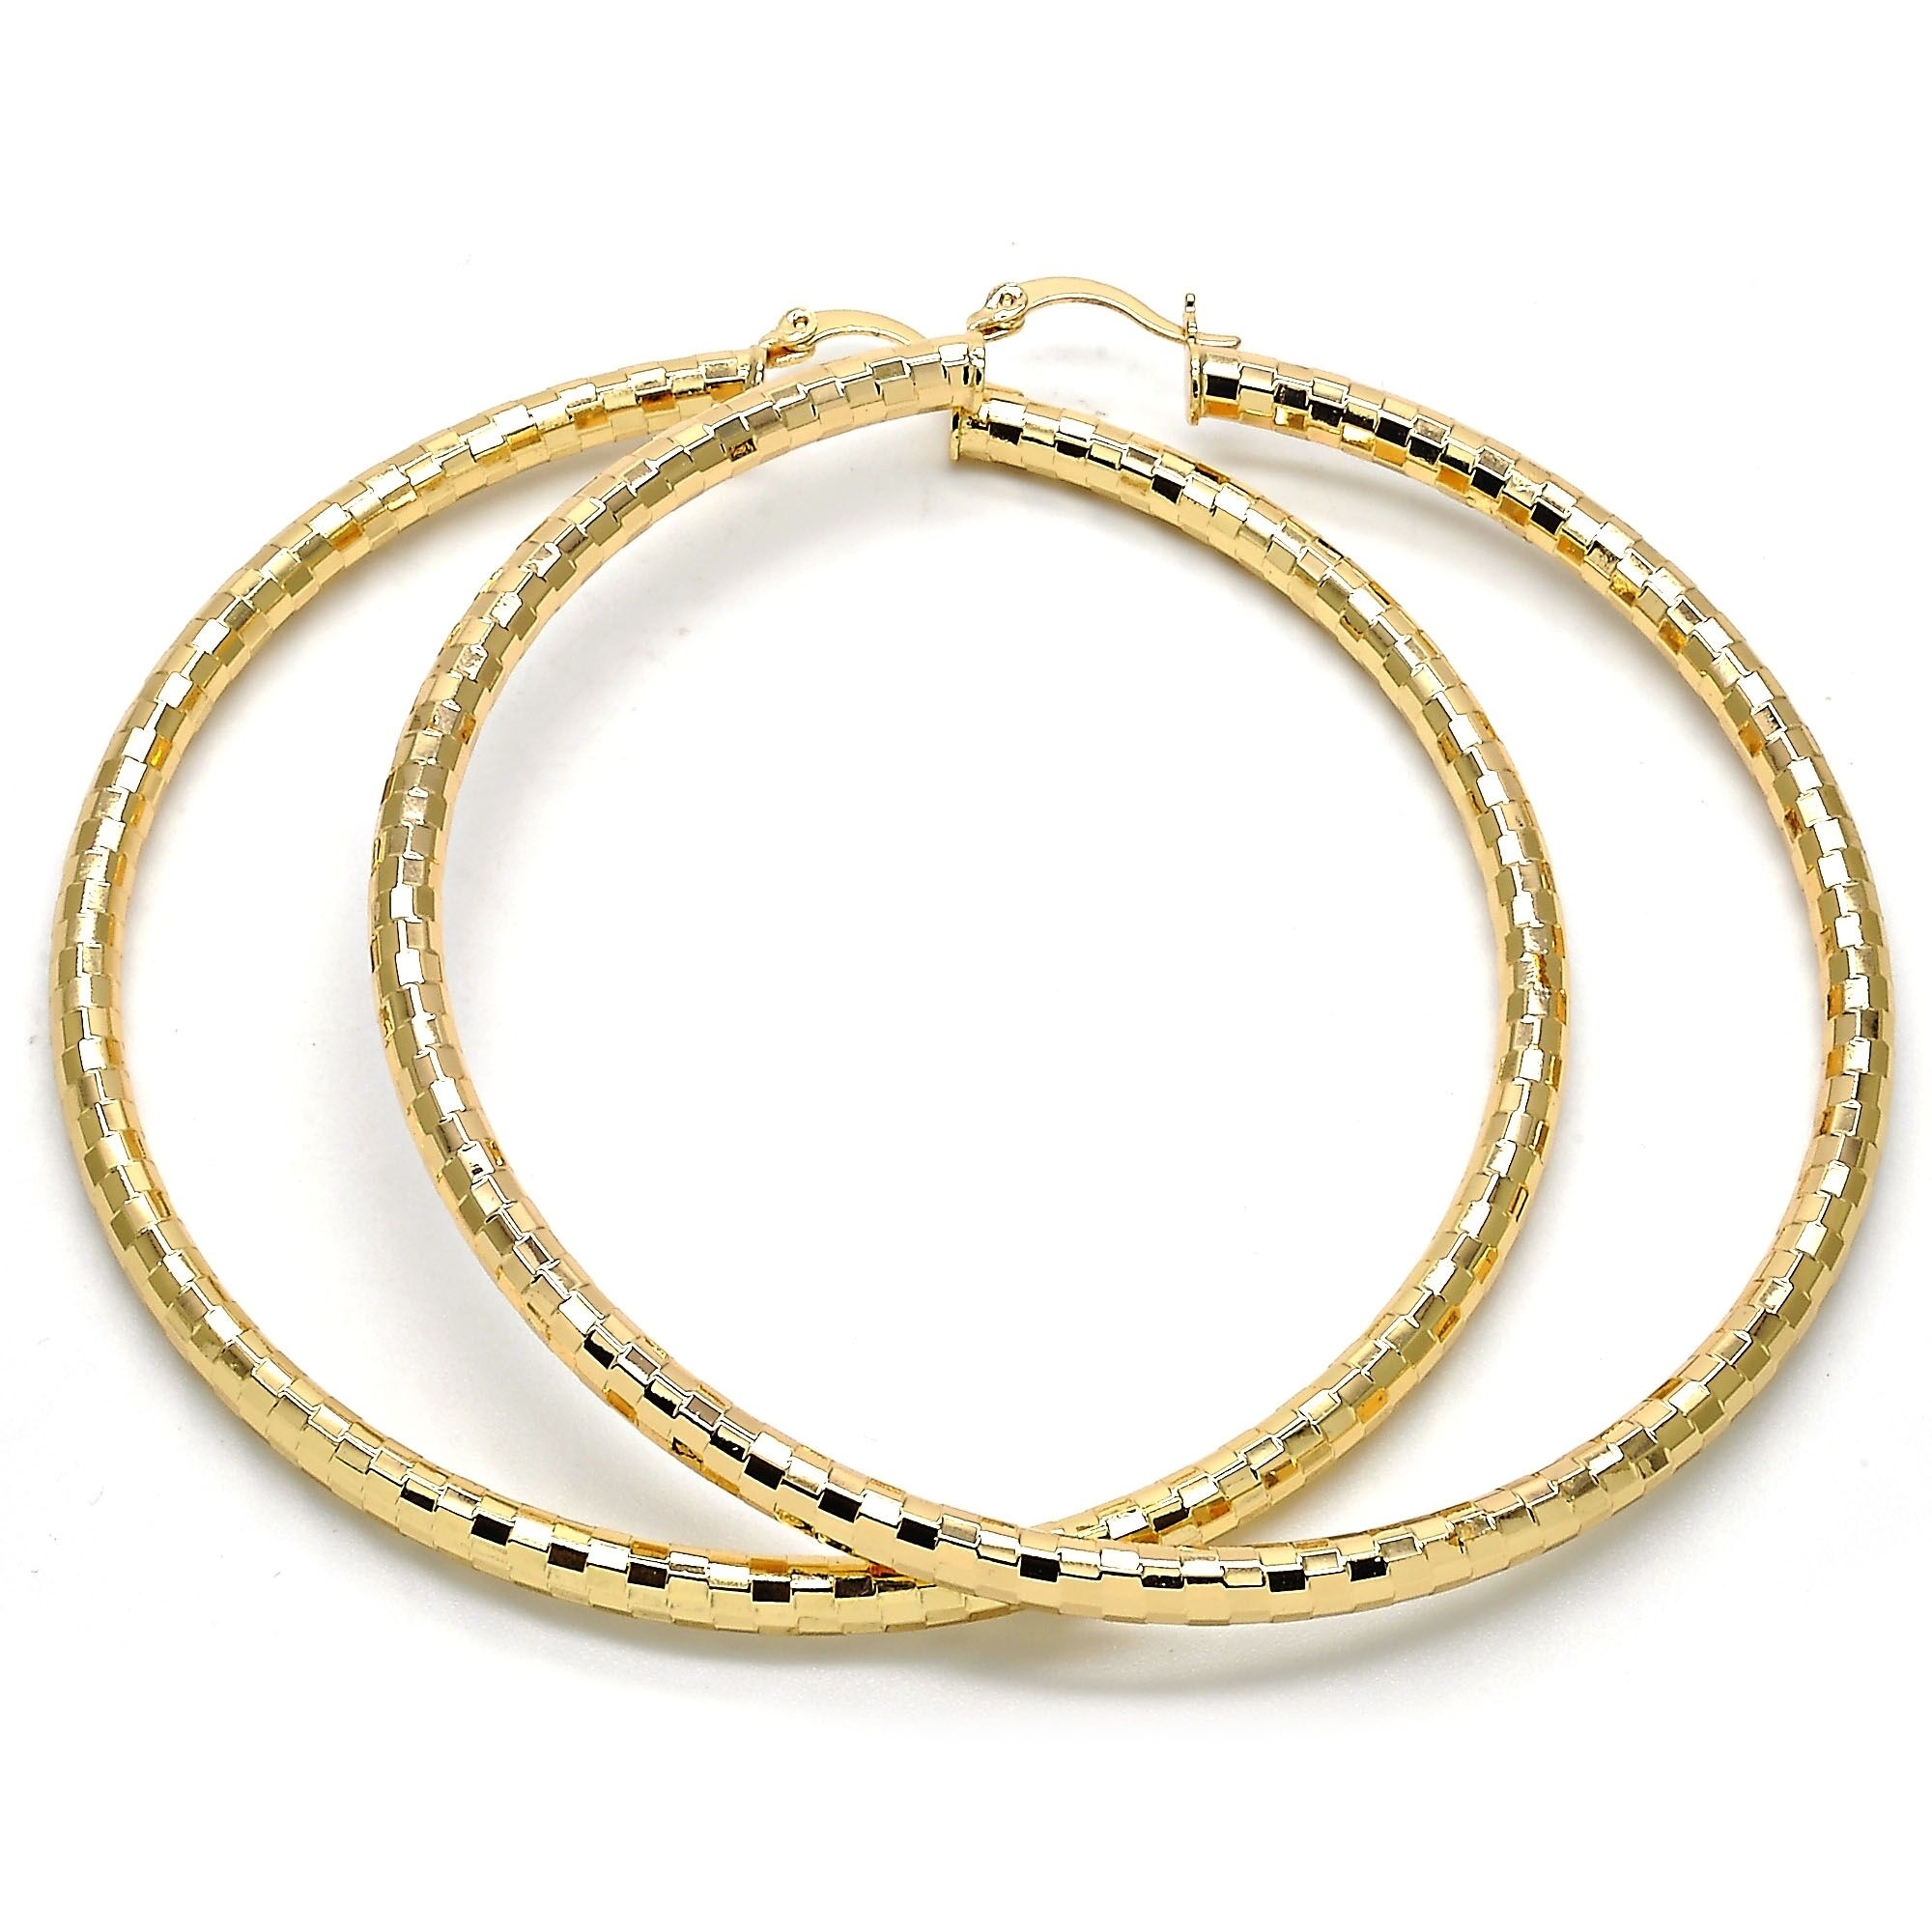 Gold Filled Extra Large Hoop, Hollow Design,Cut Diamond Style, Golden Tone 70mm